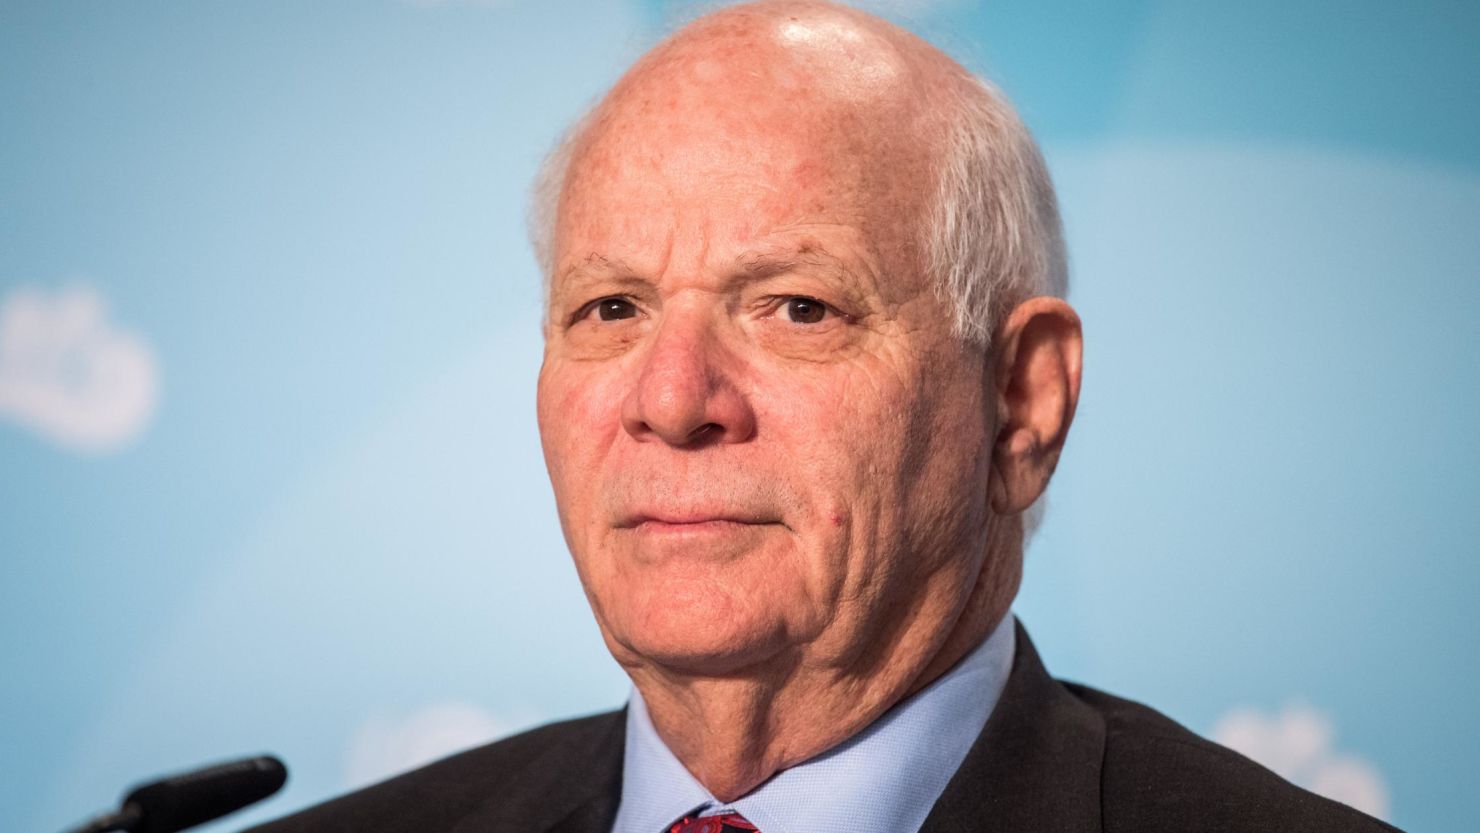 Sen. Ben Cardin of Maryland joins a press conference during the COP 23 United Nations Climate Change Conference in November 2017 in Bonn, Germany. (Lukas Schulze/Getty Images)